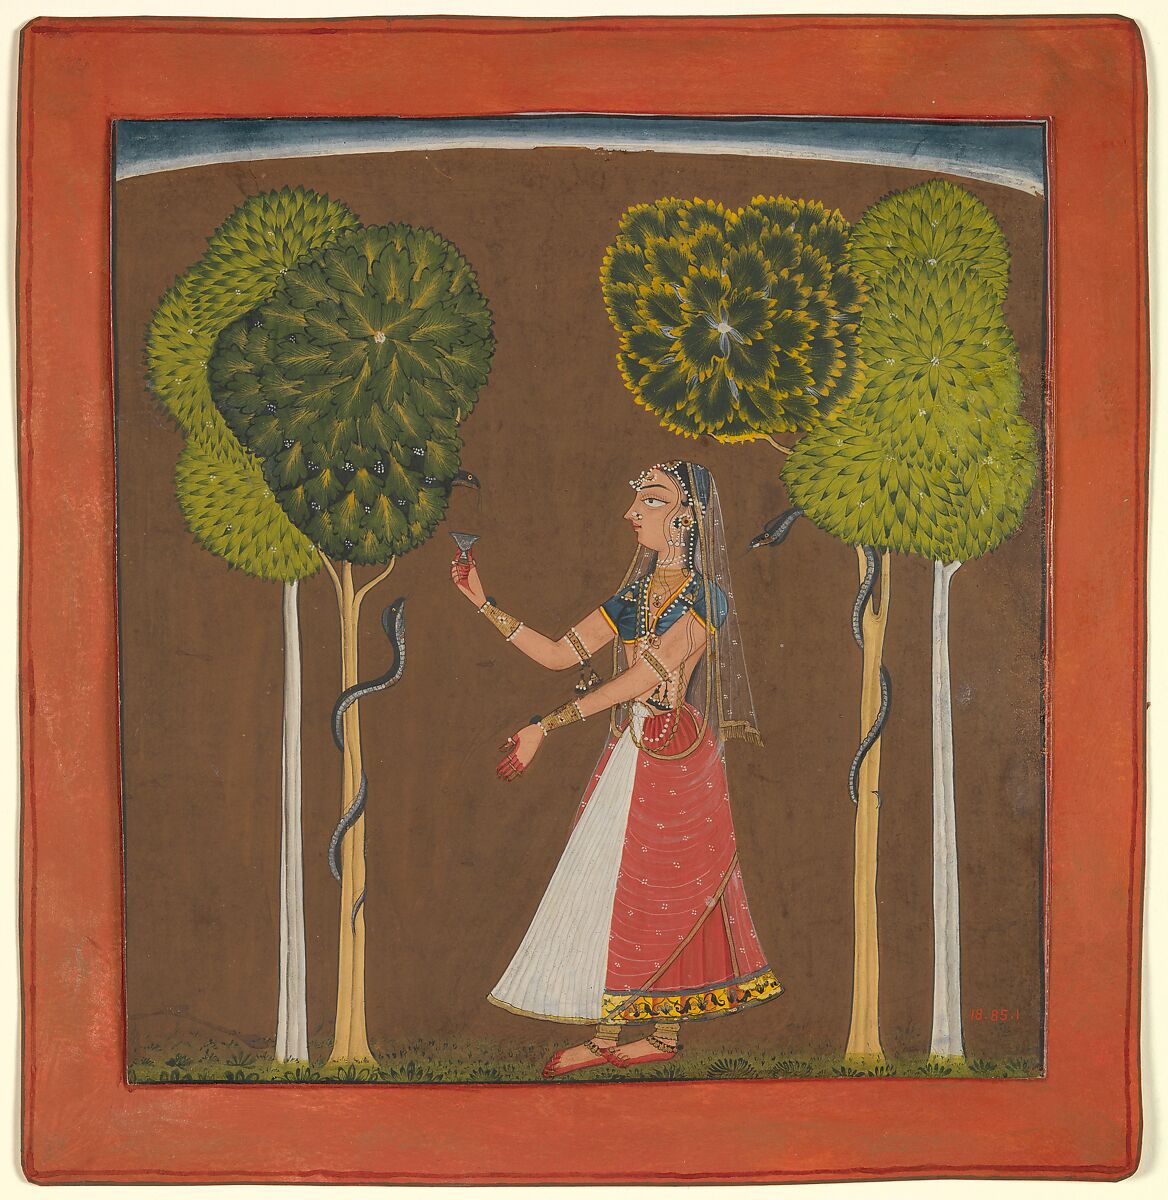 Ragini, possibly Asavari: Folio from a Ragamala Series

, Ink and opaque watercolor on paper, India (Himachal Pradesh, Mankot)